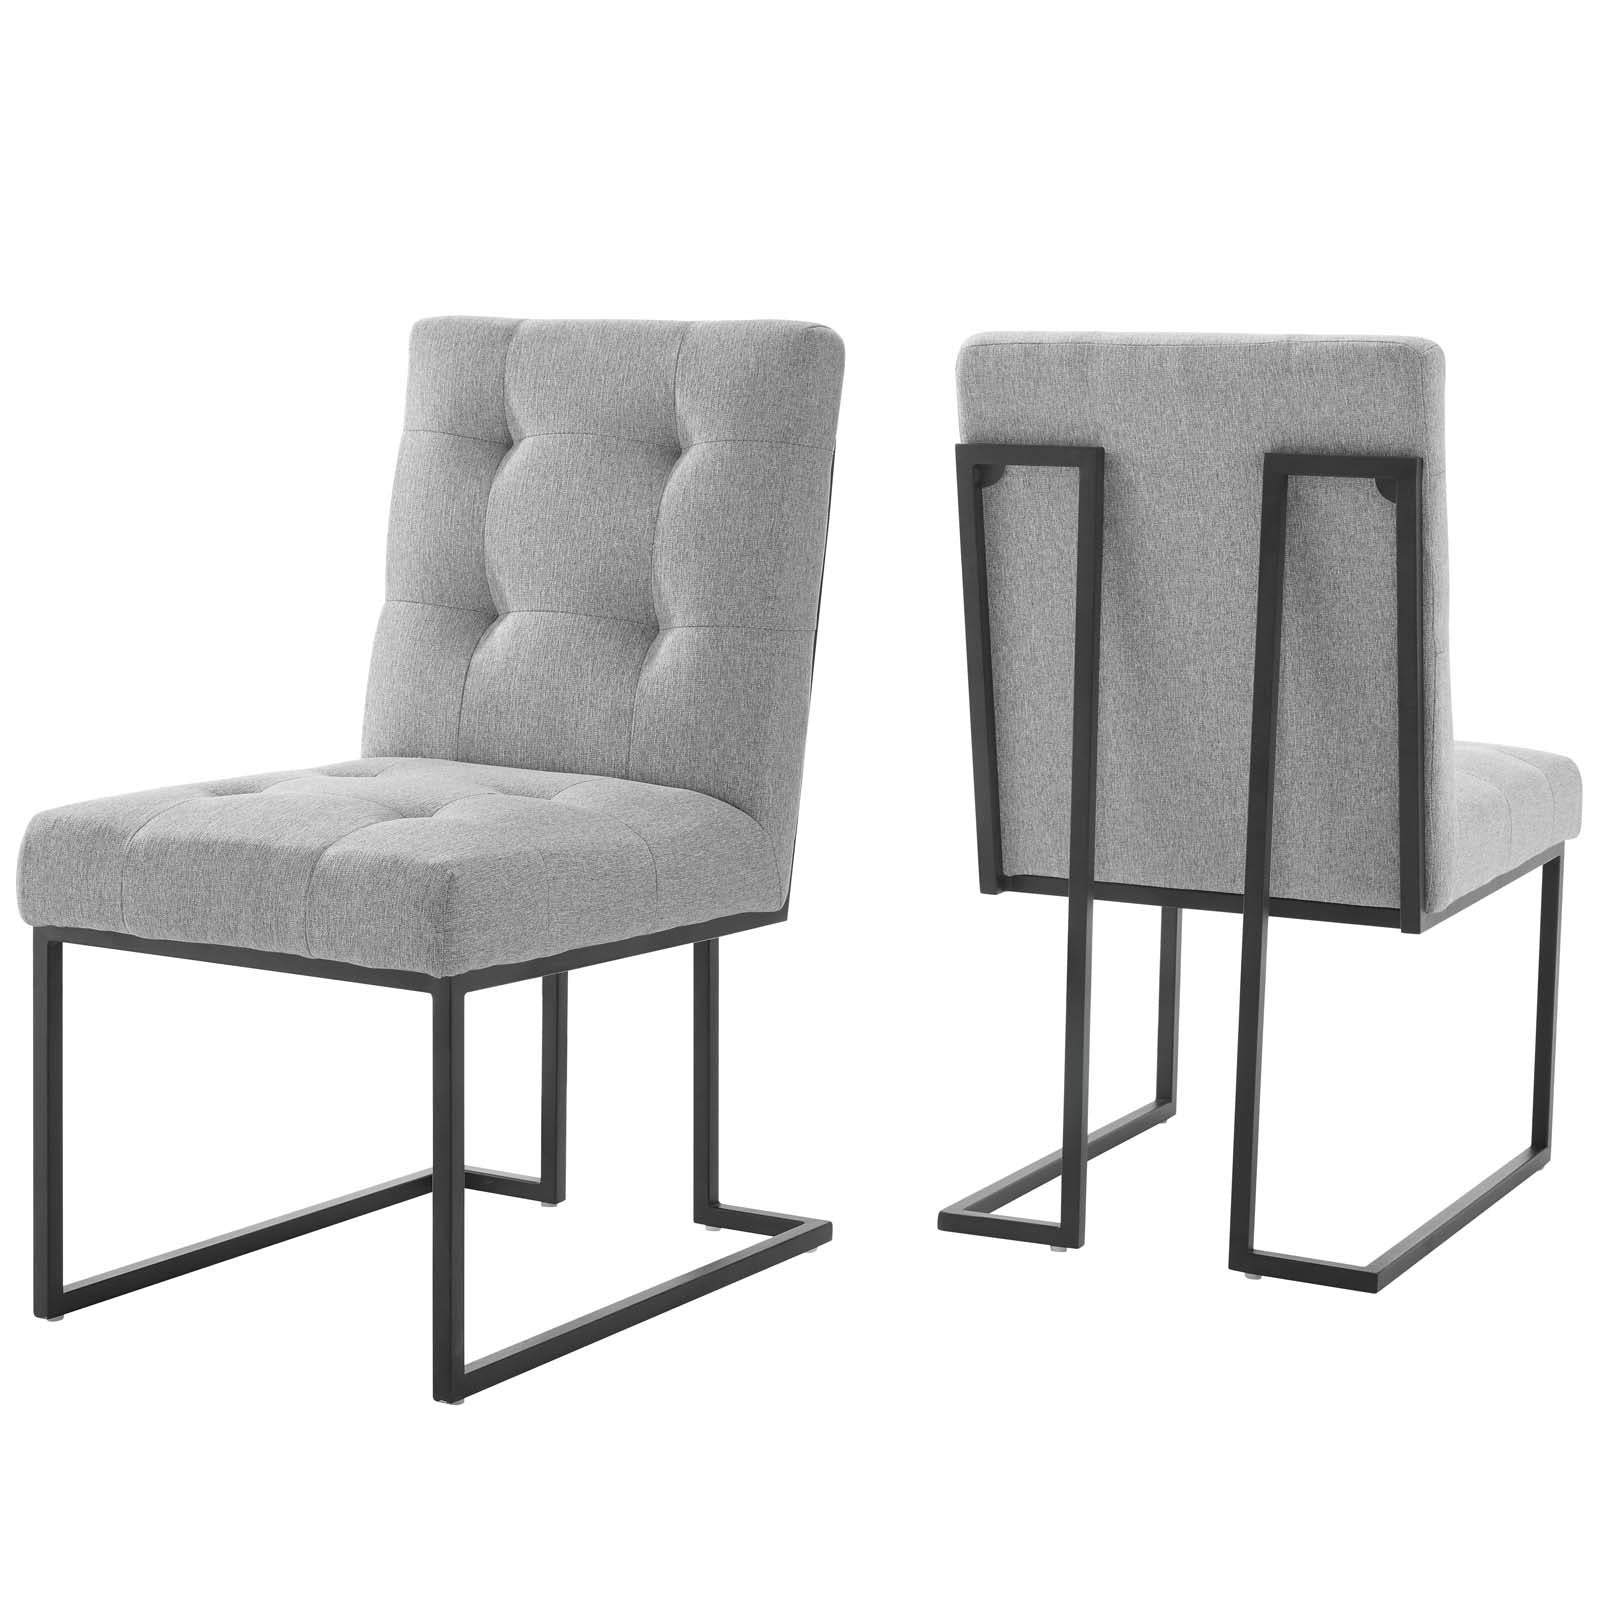 Modway Dining Chairs - Privy Black Stainless Steel Upholstered Fabric Dining Chair Set of 2 Black Light Gray